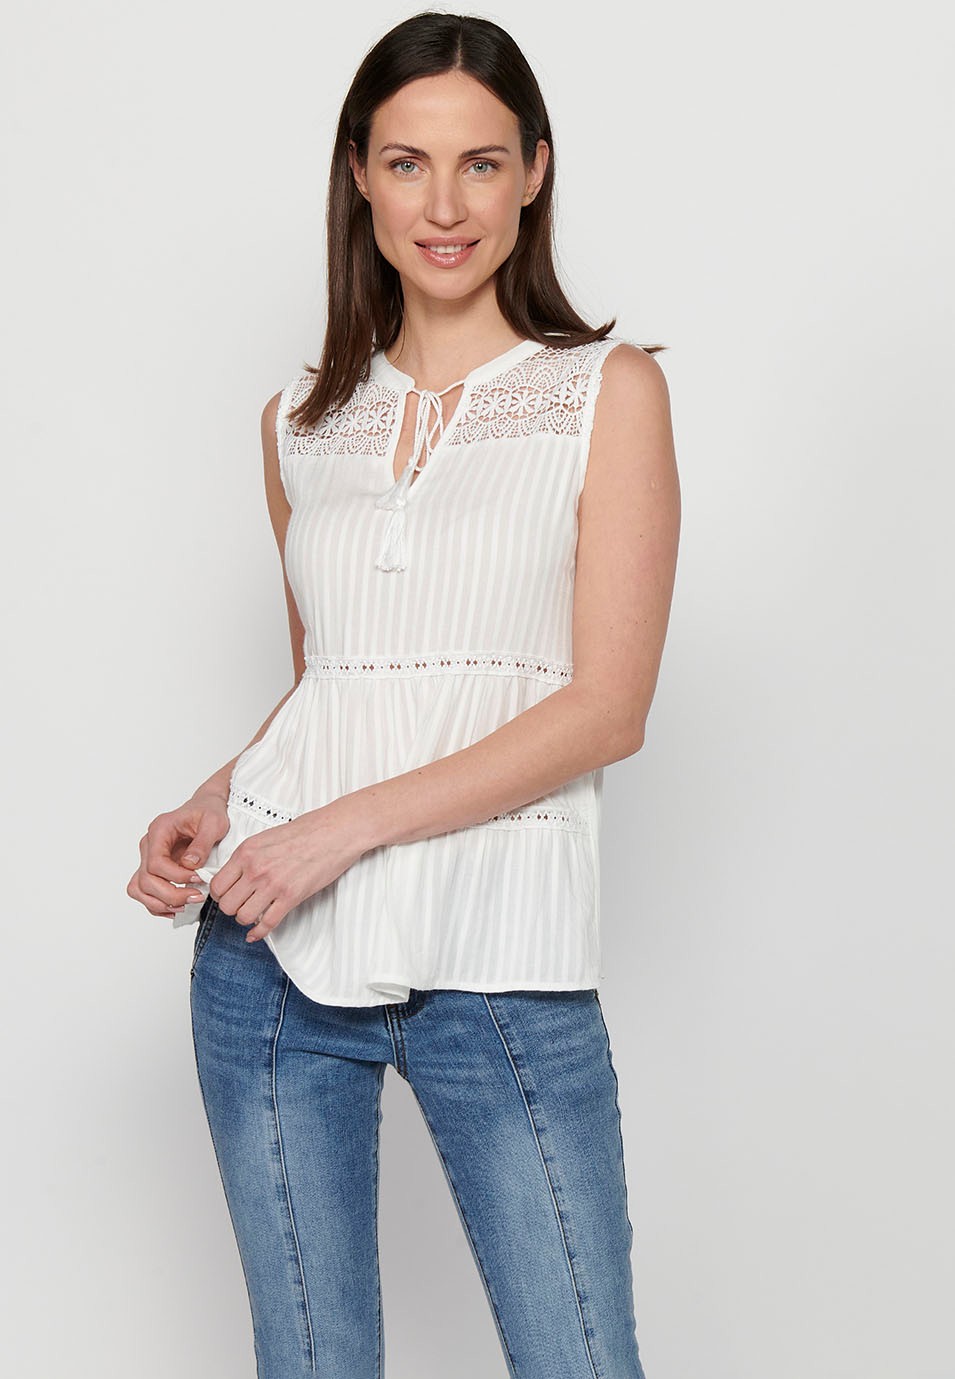 Sleeveless blouse. round neckline with opening, white color for women